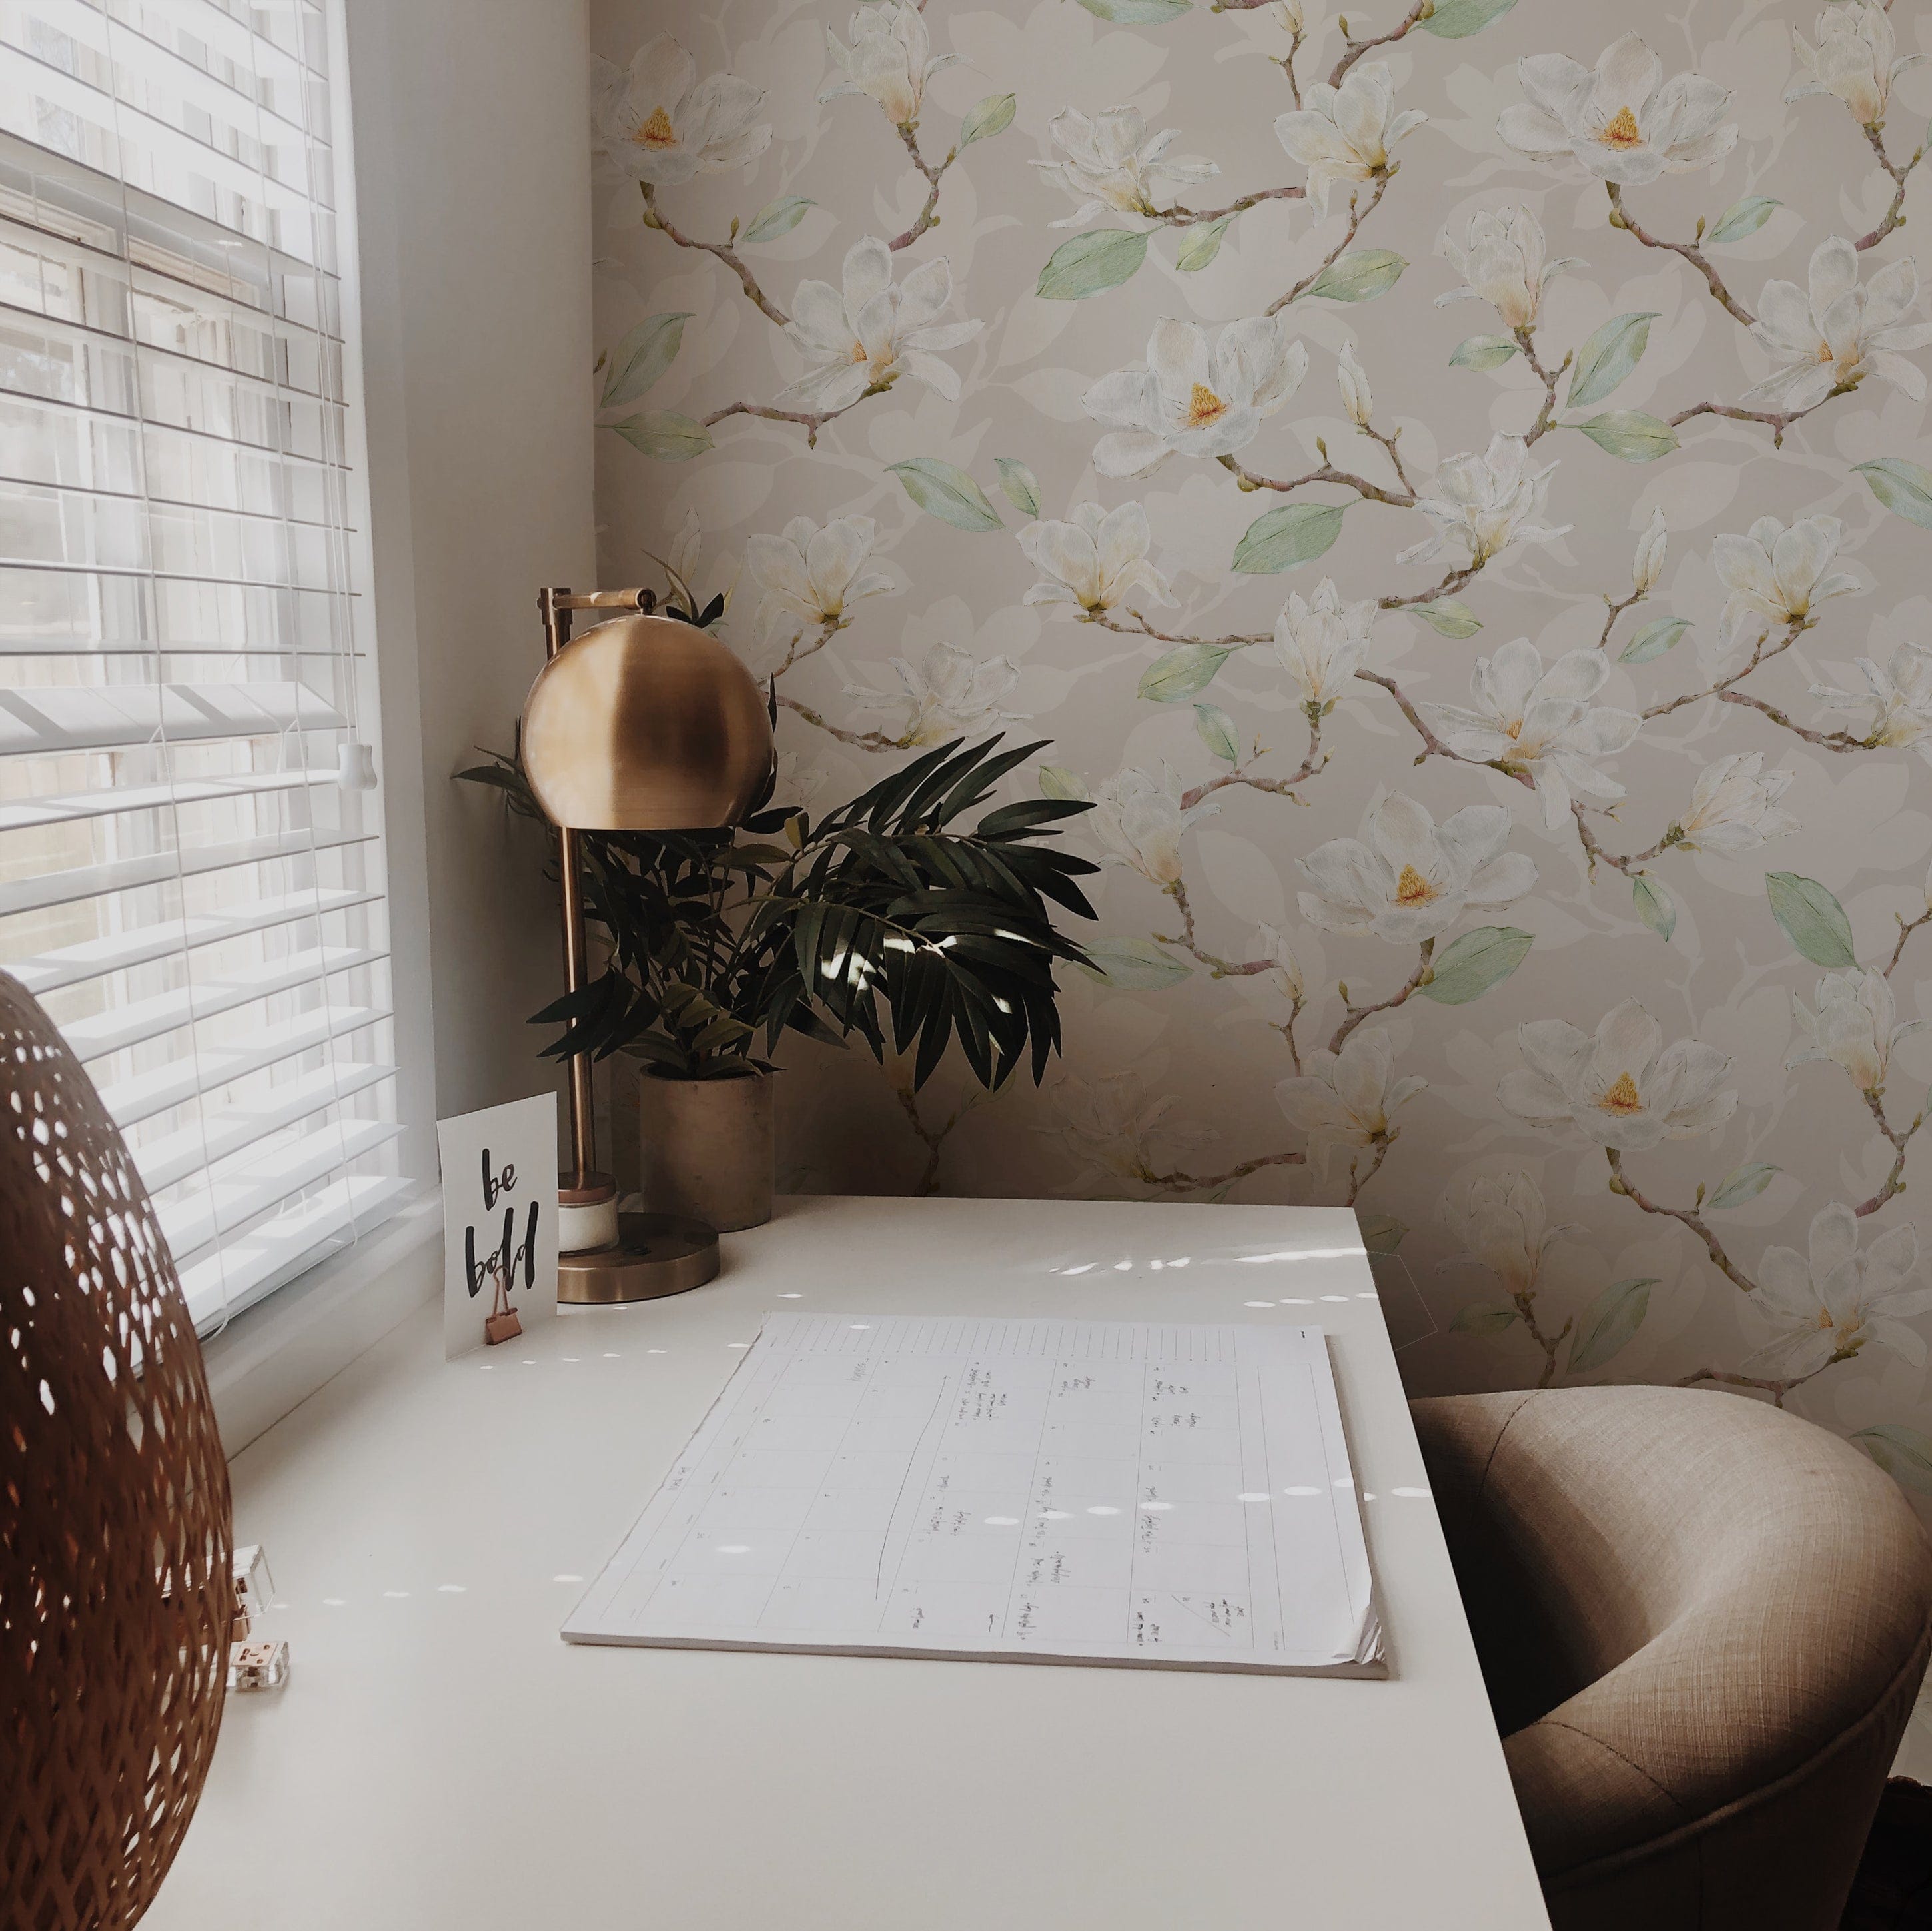 Peel and Stick Wallpaper Tips for Small Space Living. Part 2.